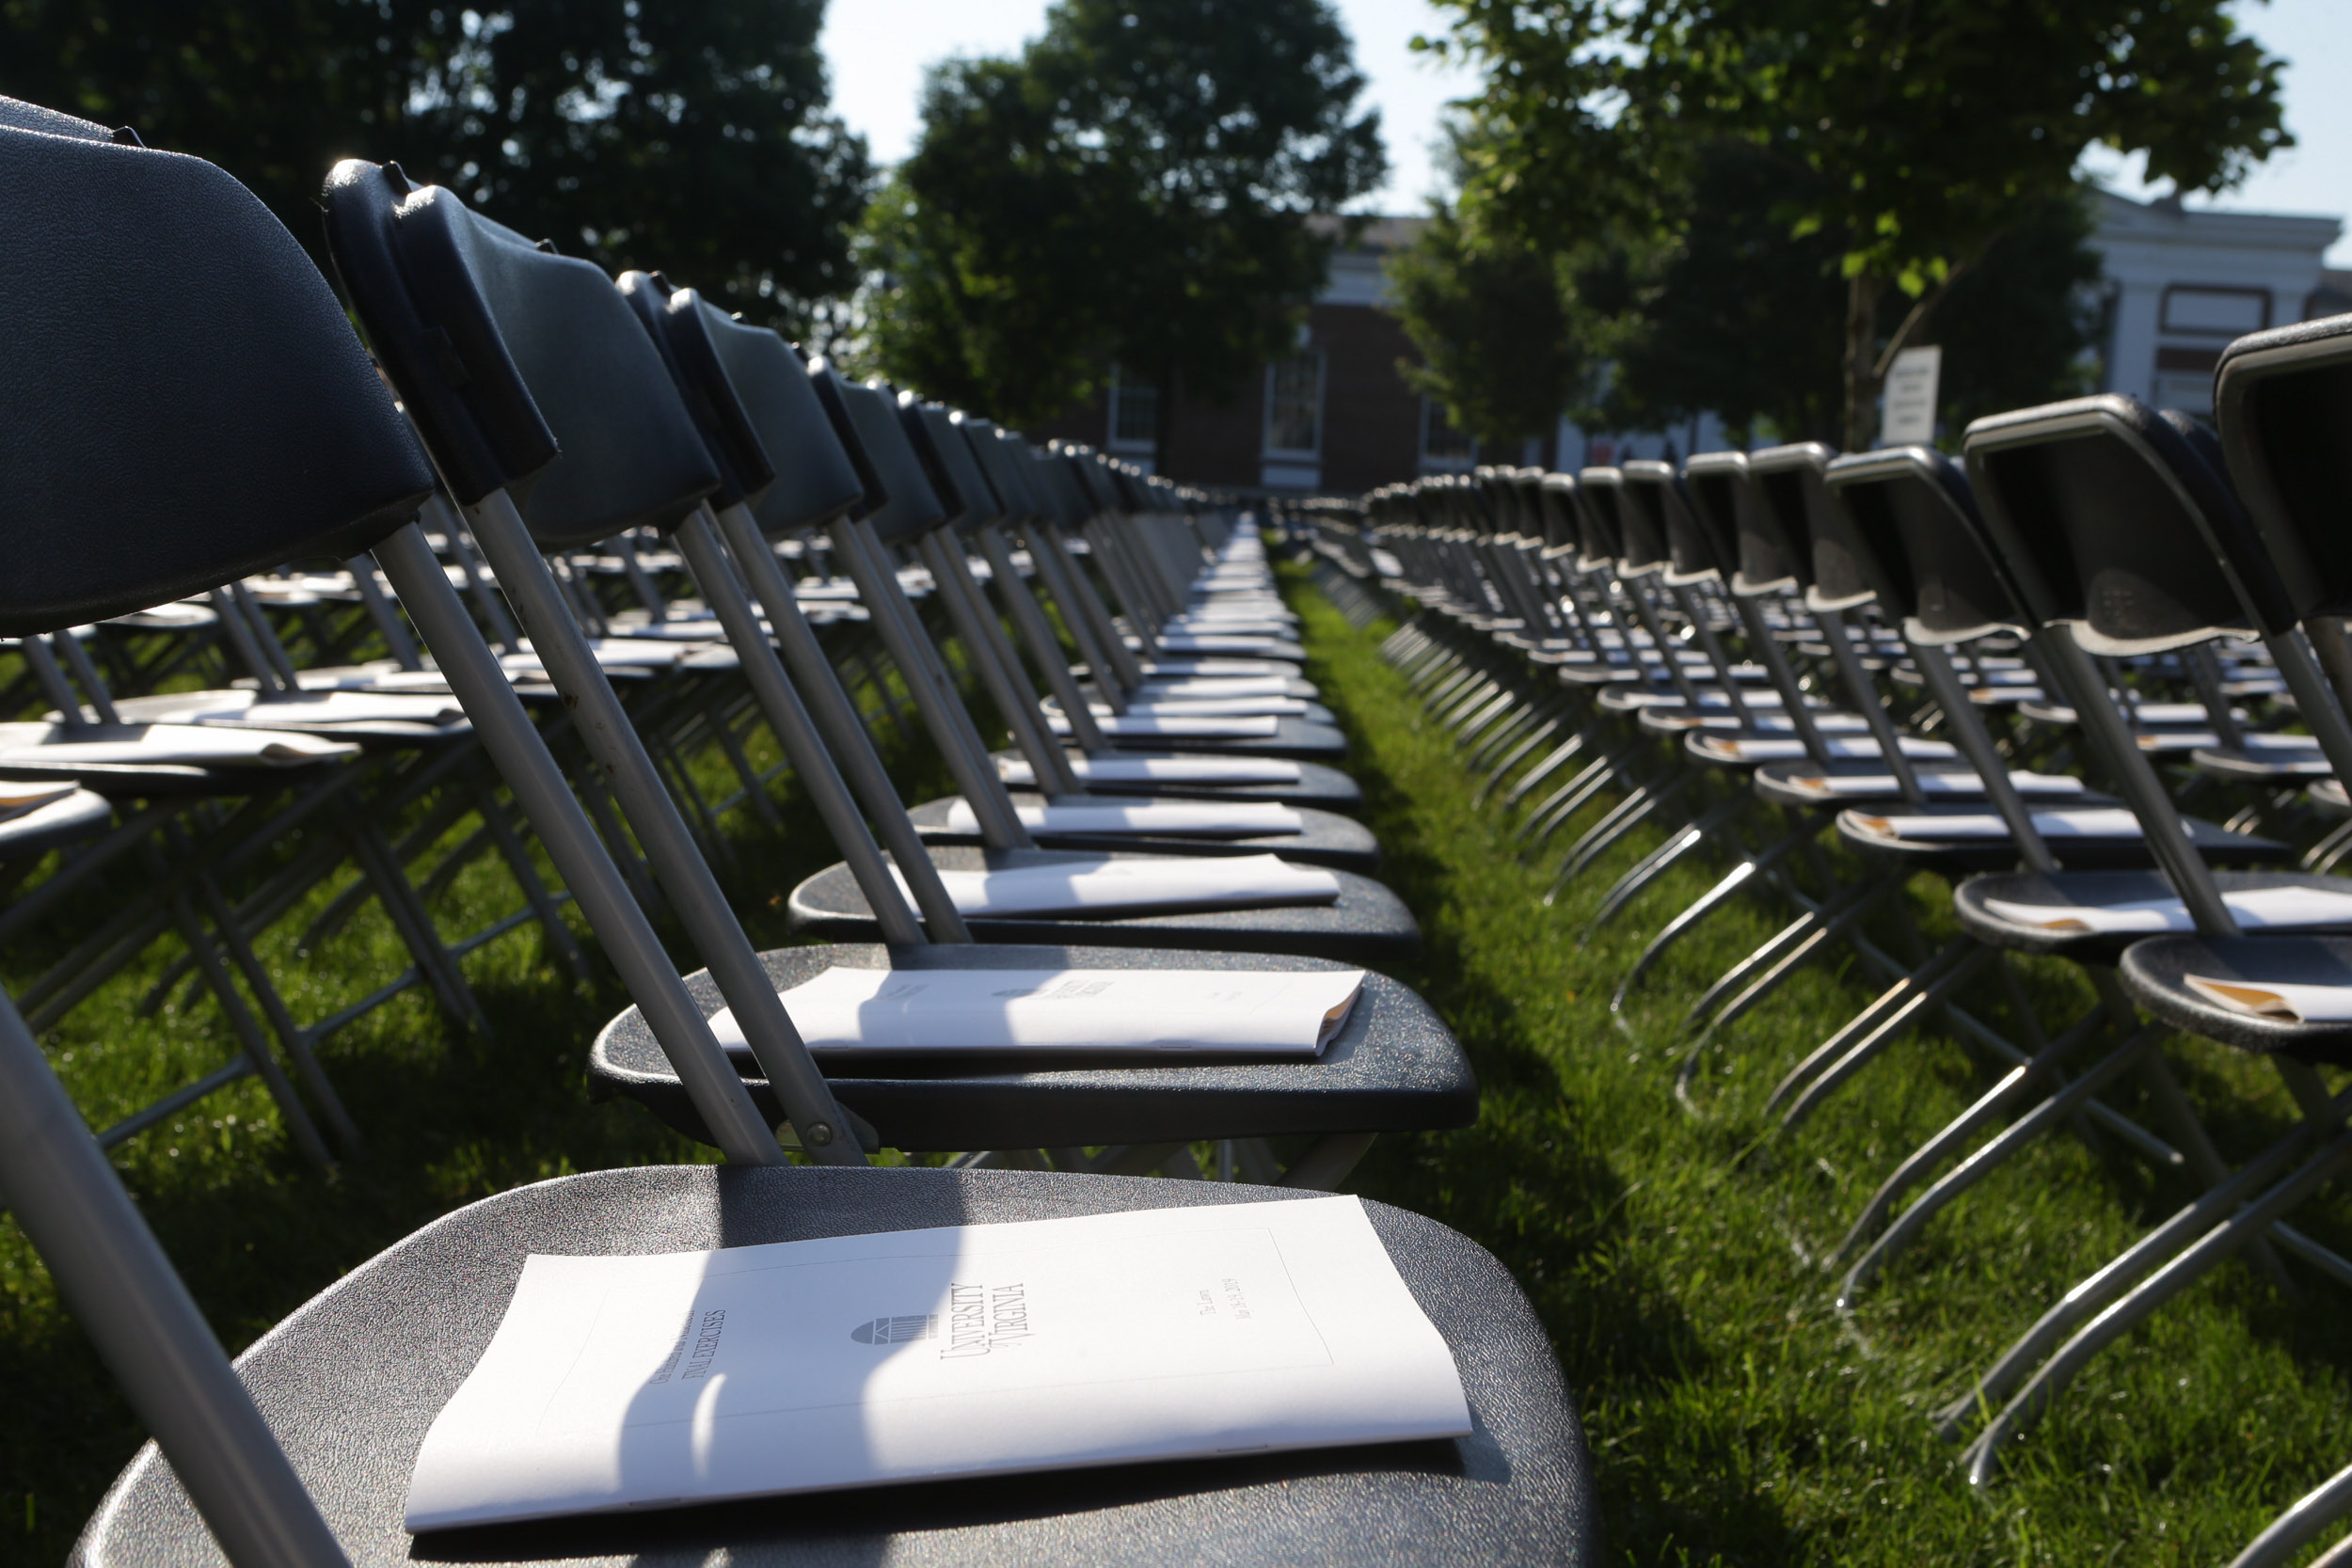 Empty chairs with graduation books on them